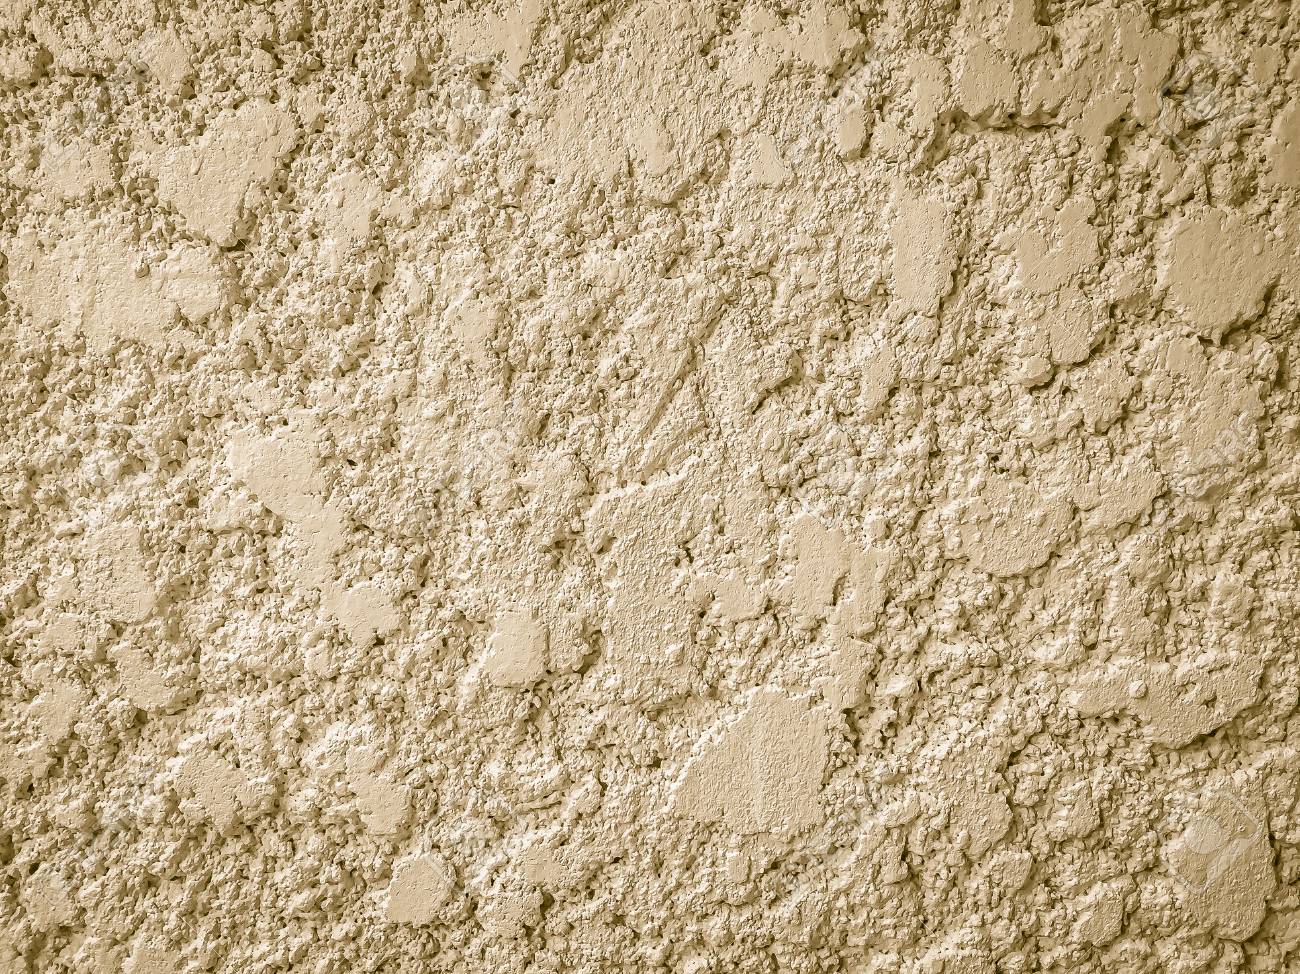 Stucco mortar plastered wall texture with grey and rough surface background.